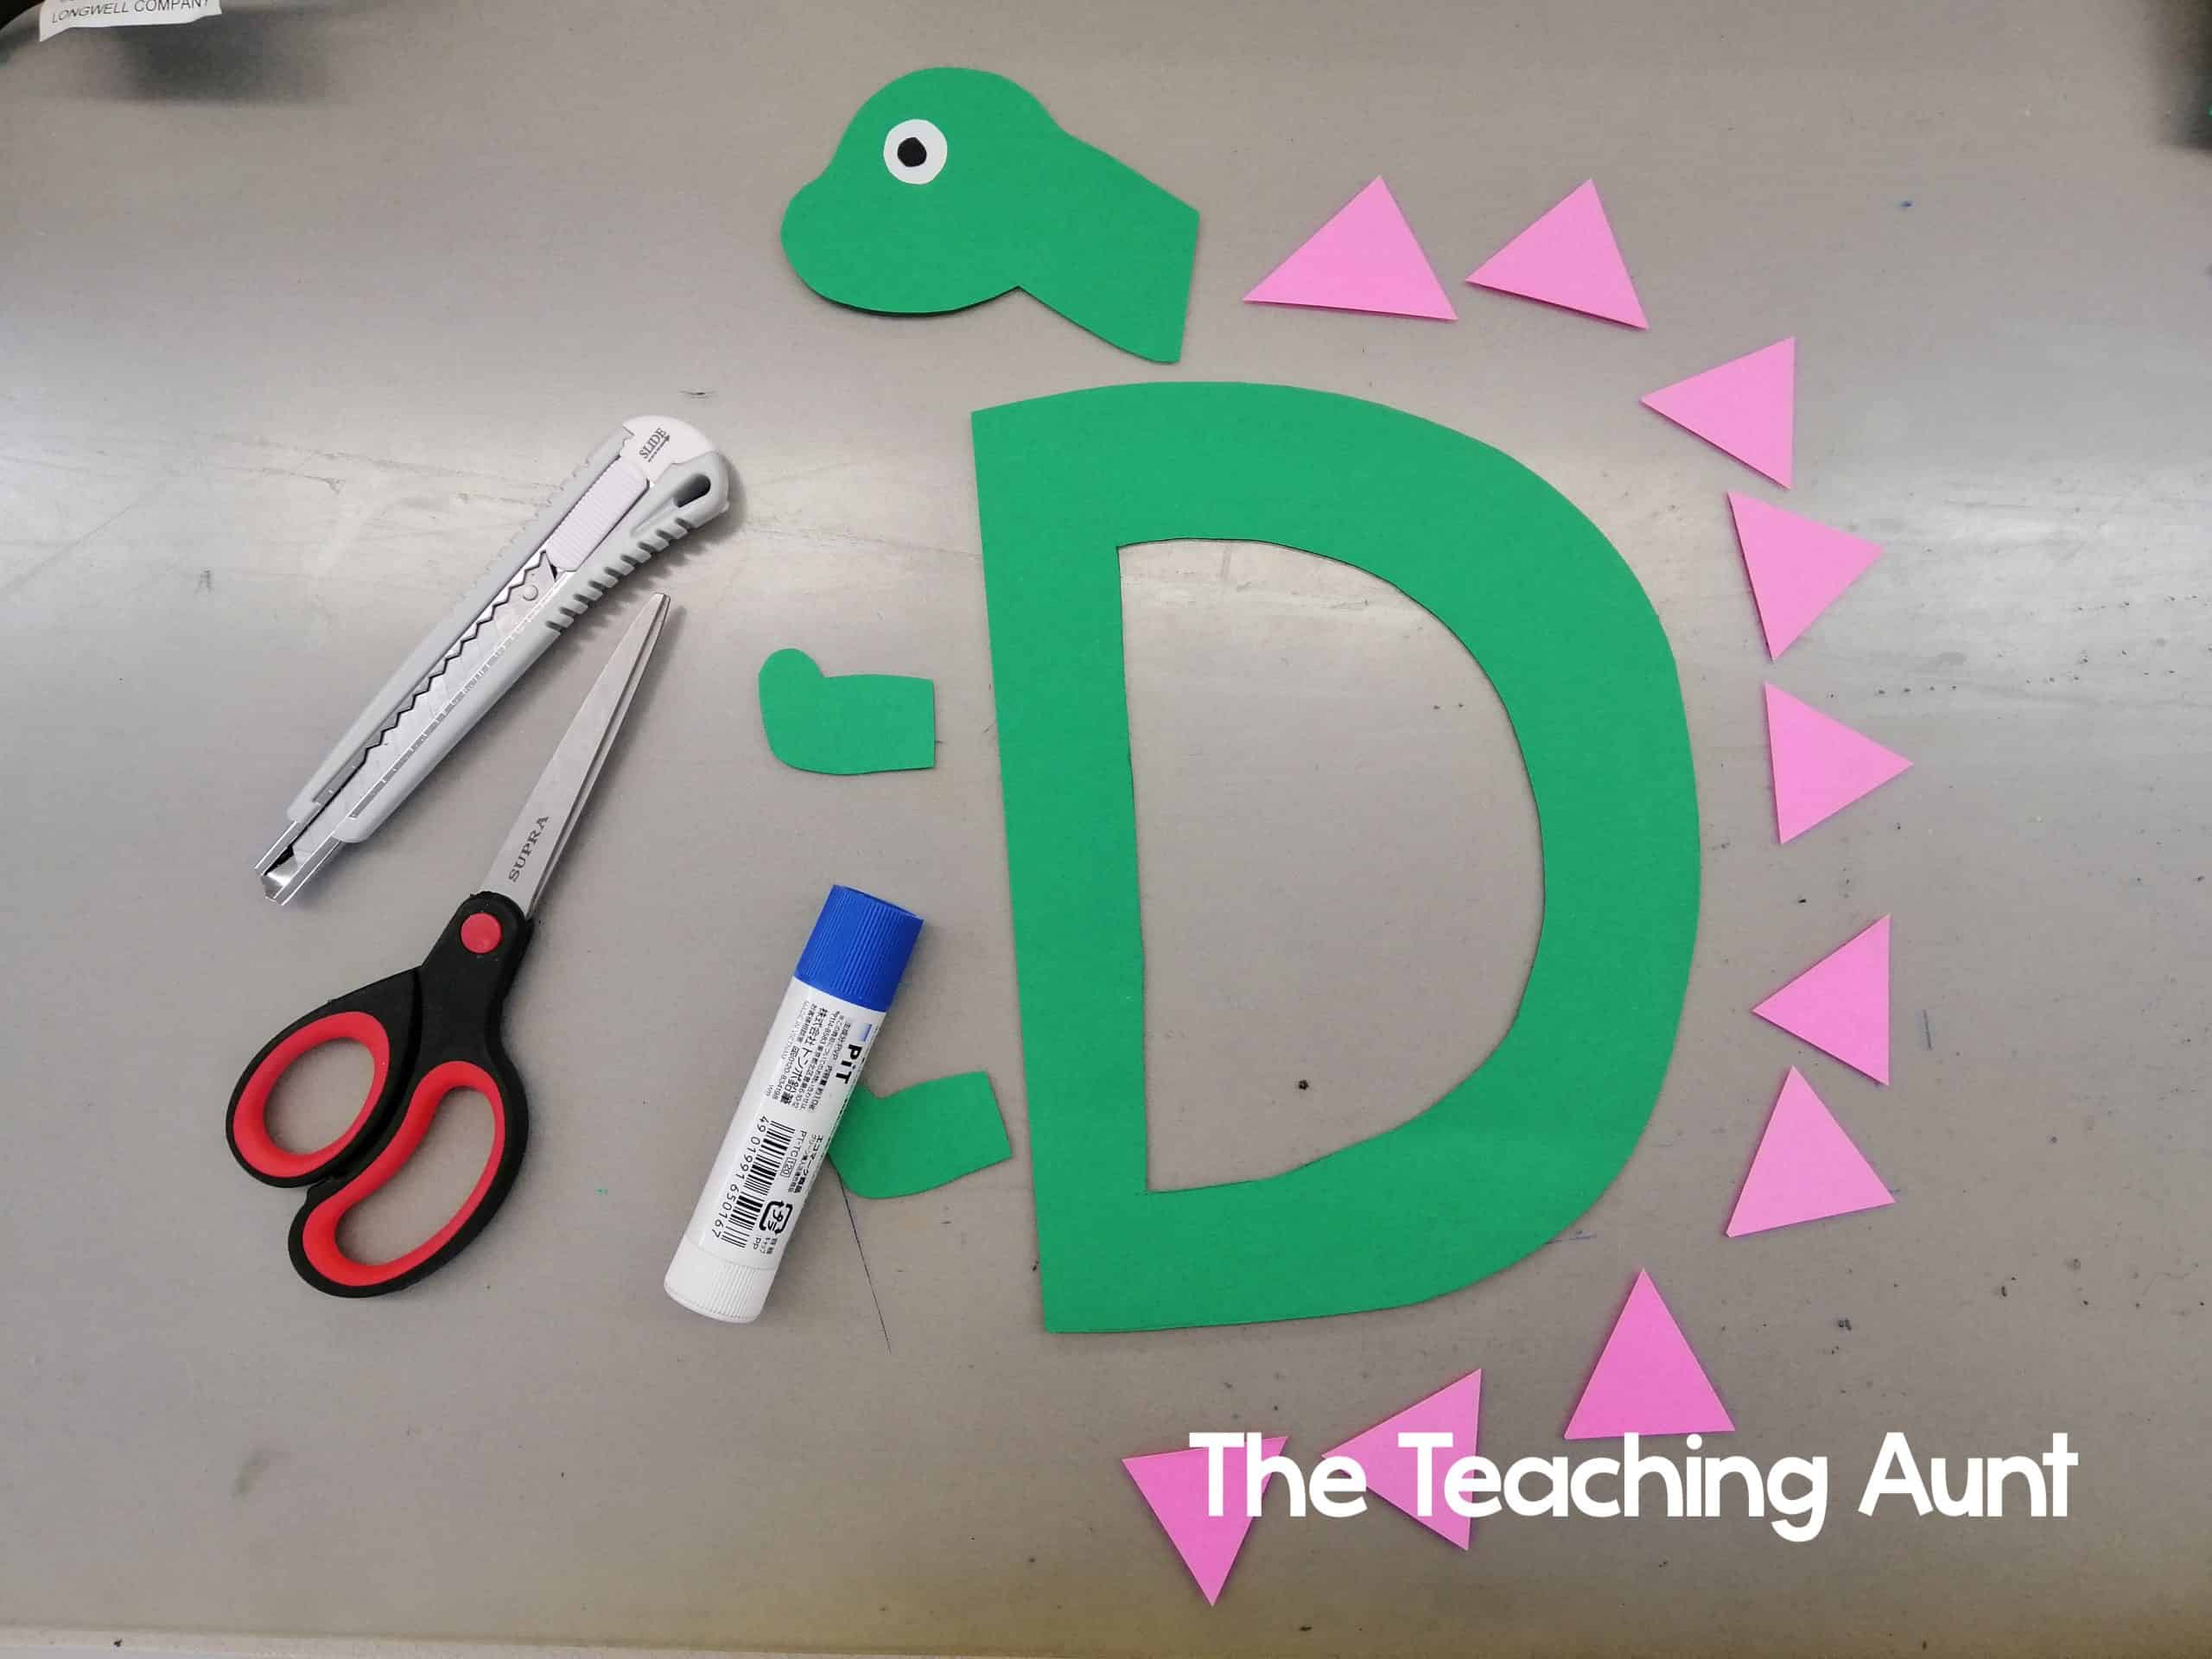 D is for Dinosaur Art and Craft